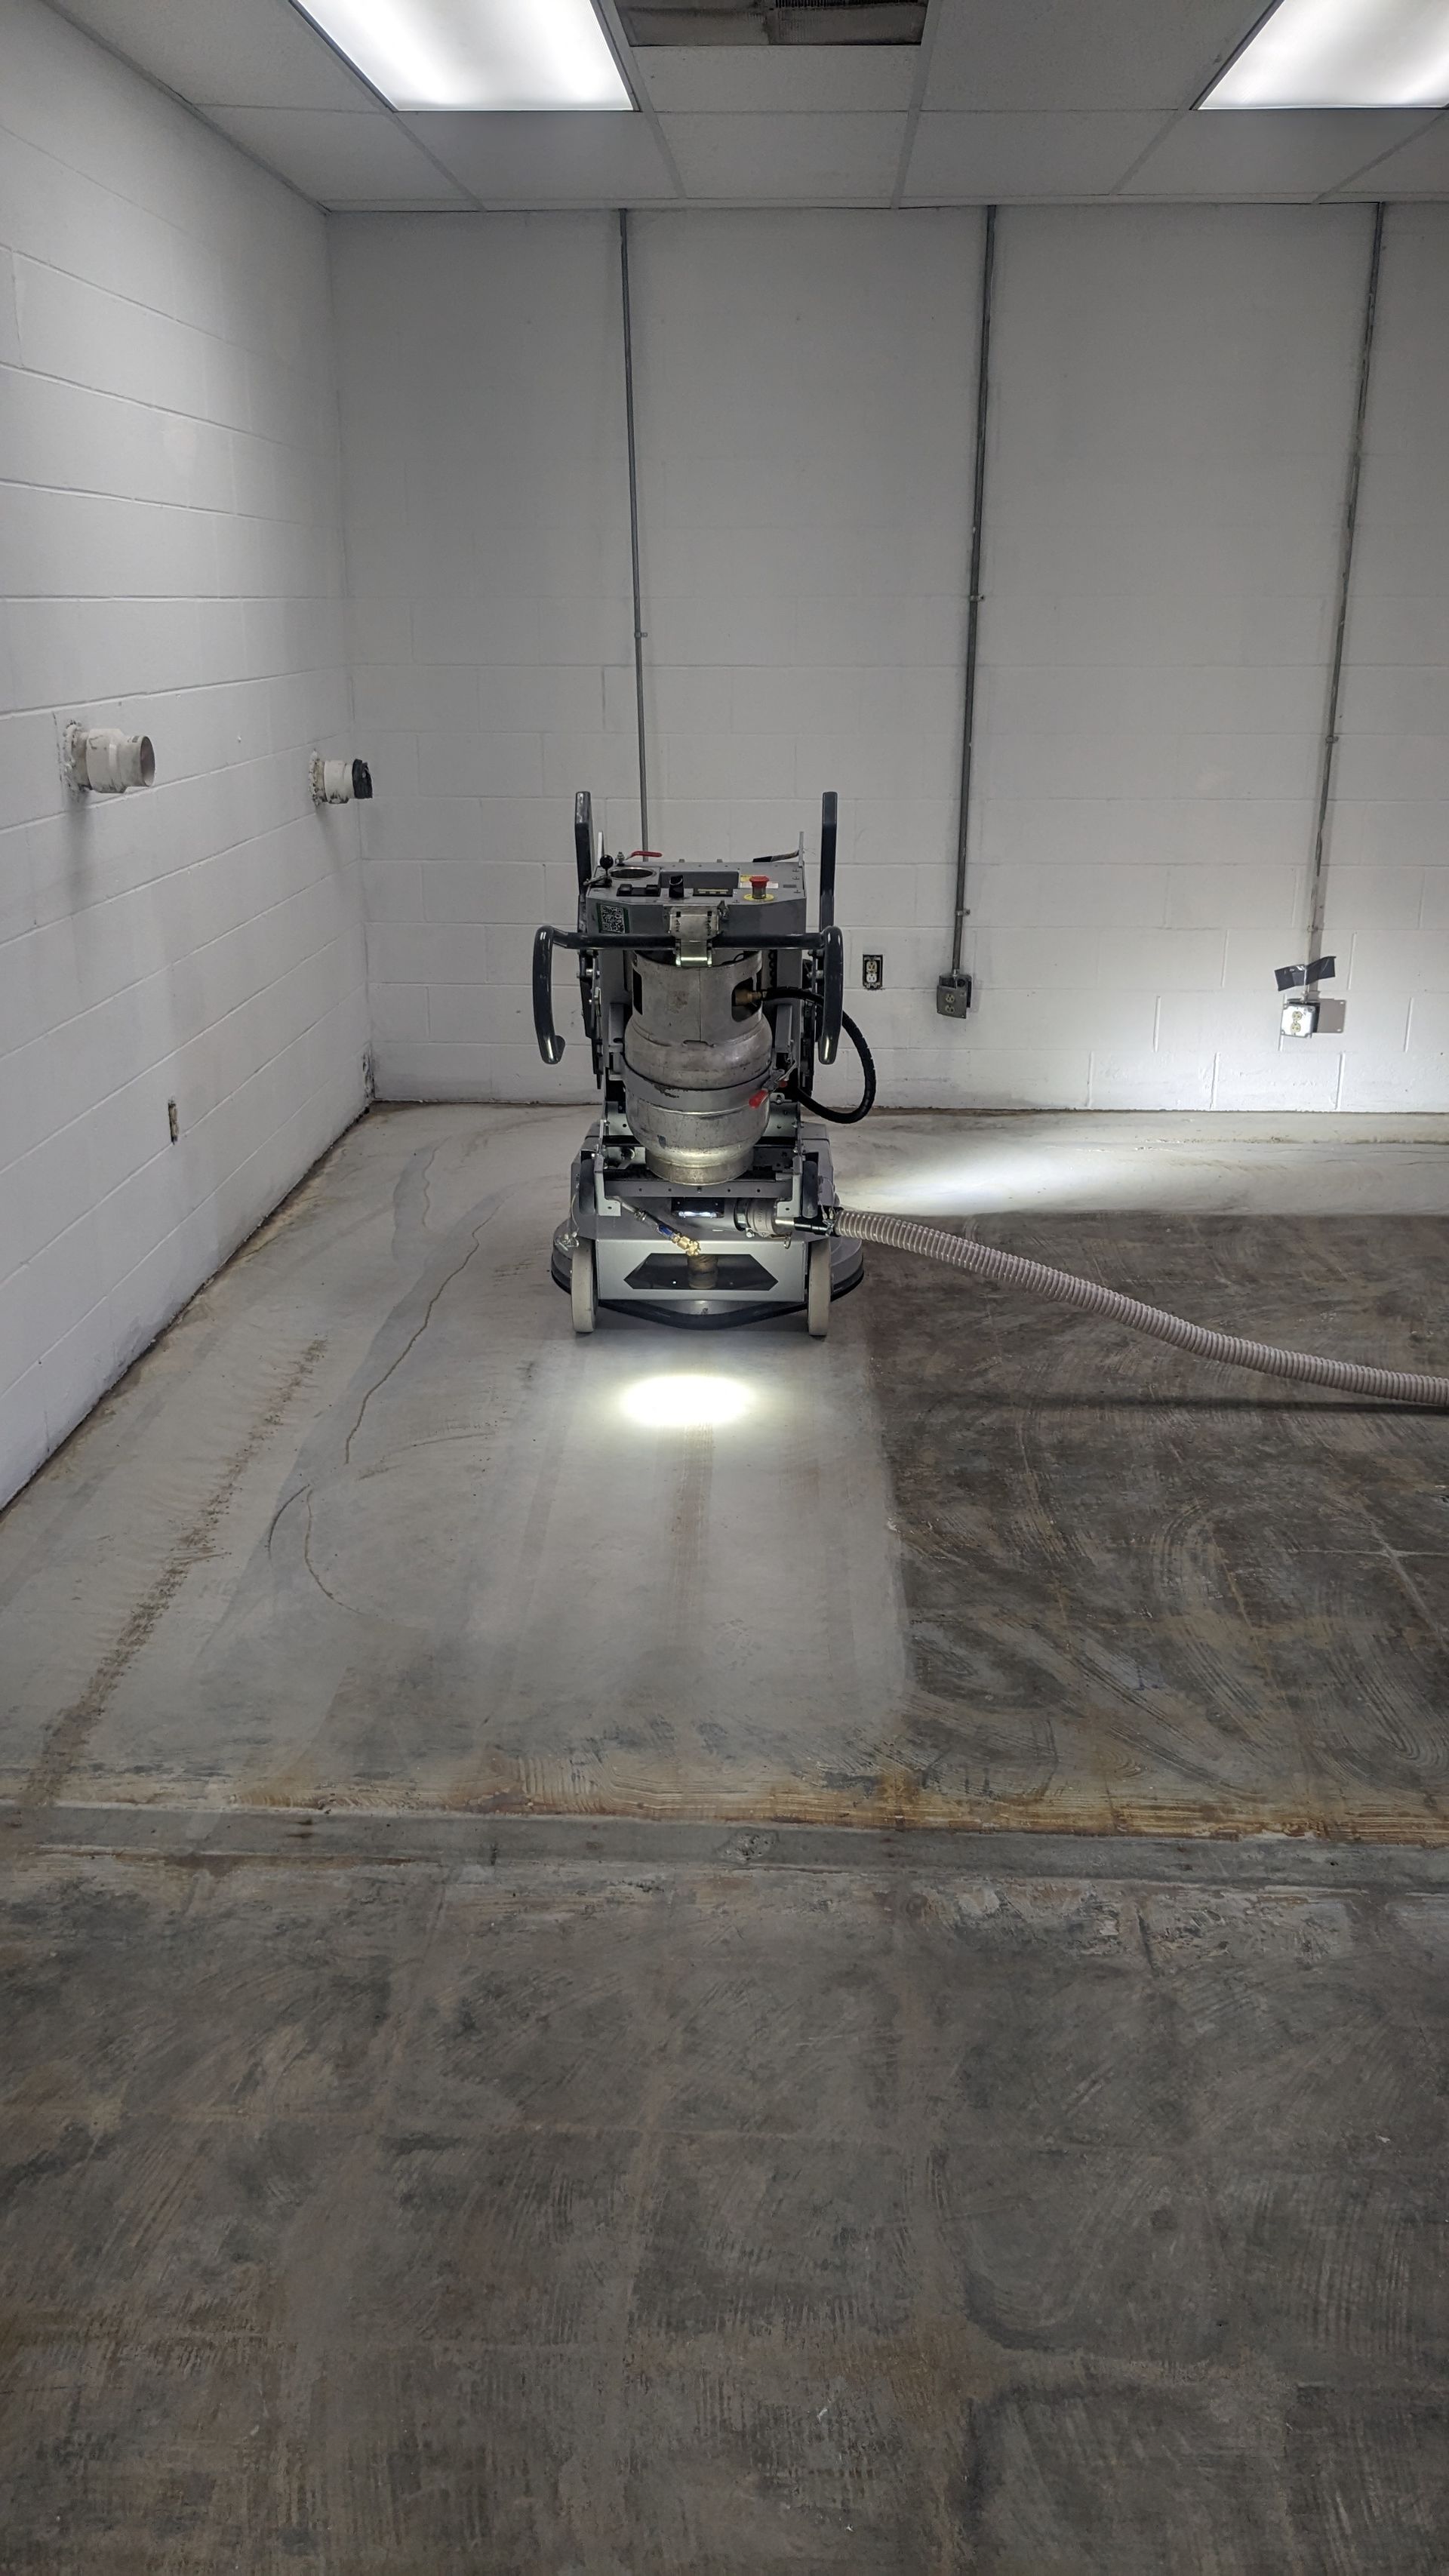 A machine is grinding a concrete floor in a room.